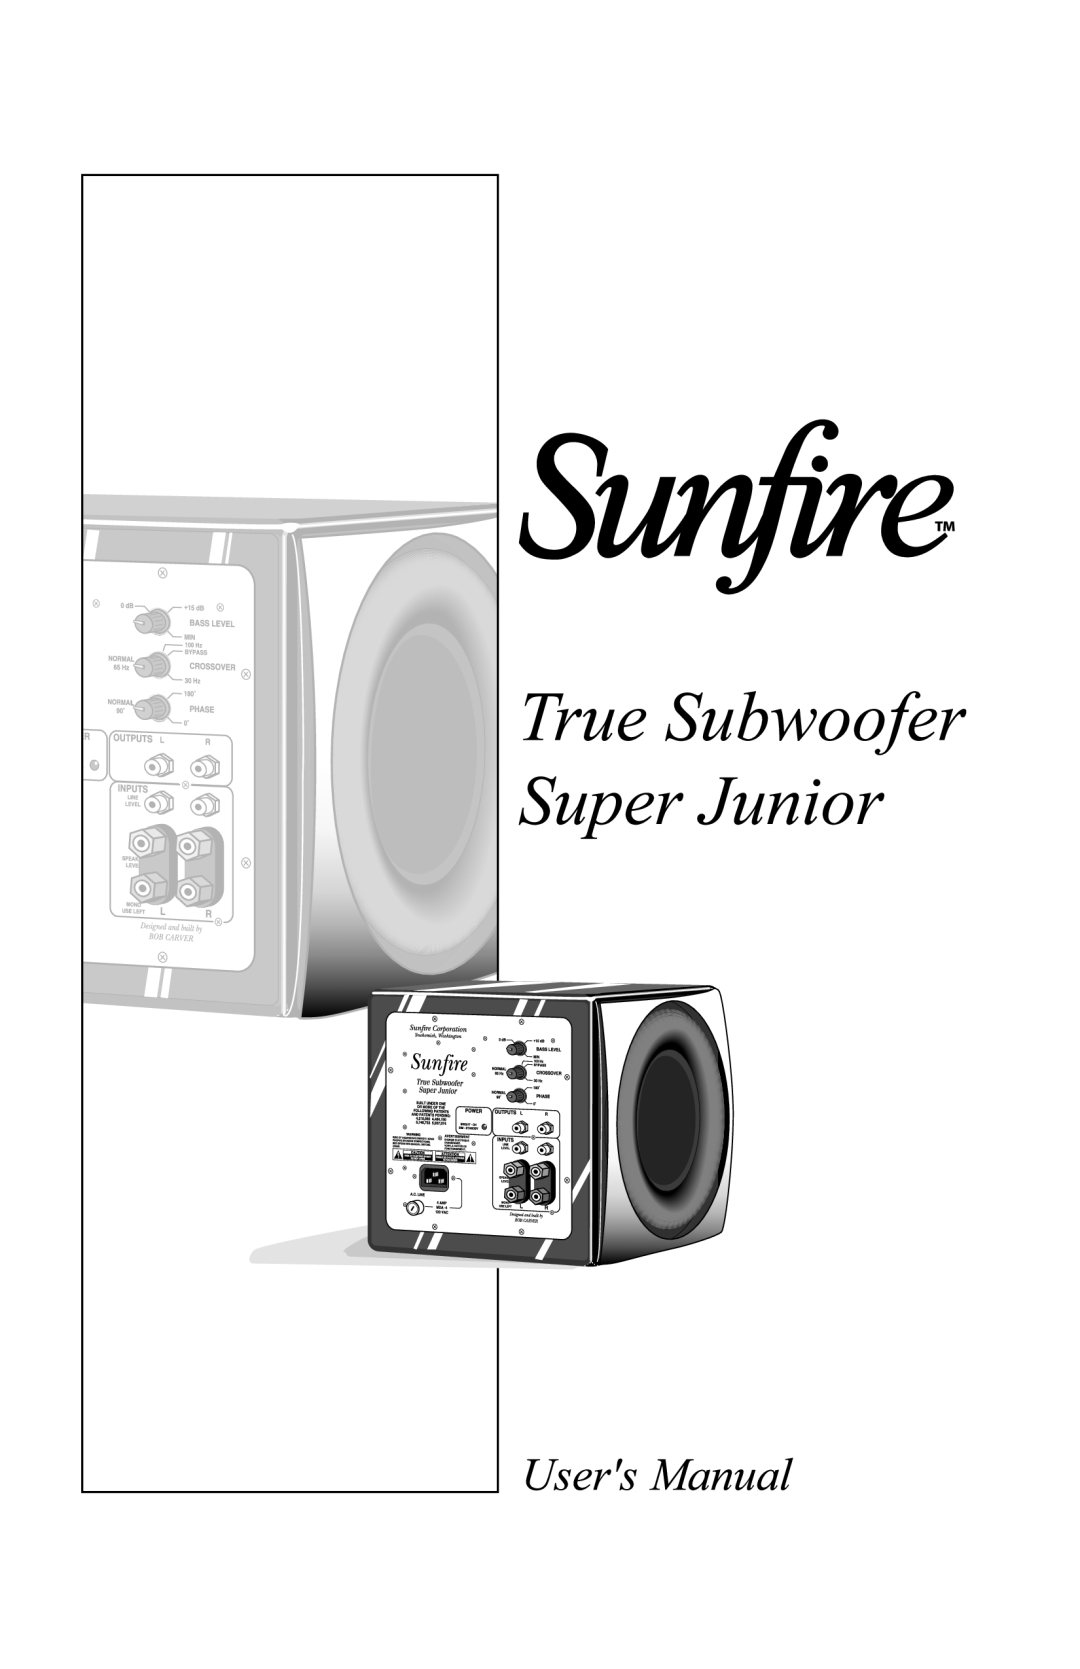 Sunfire Home Theater System manual 